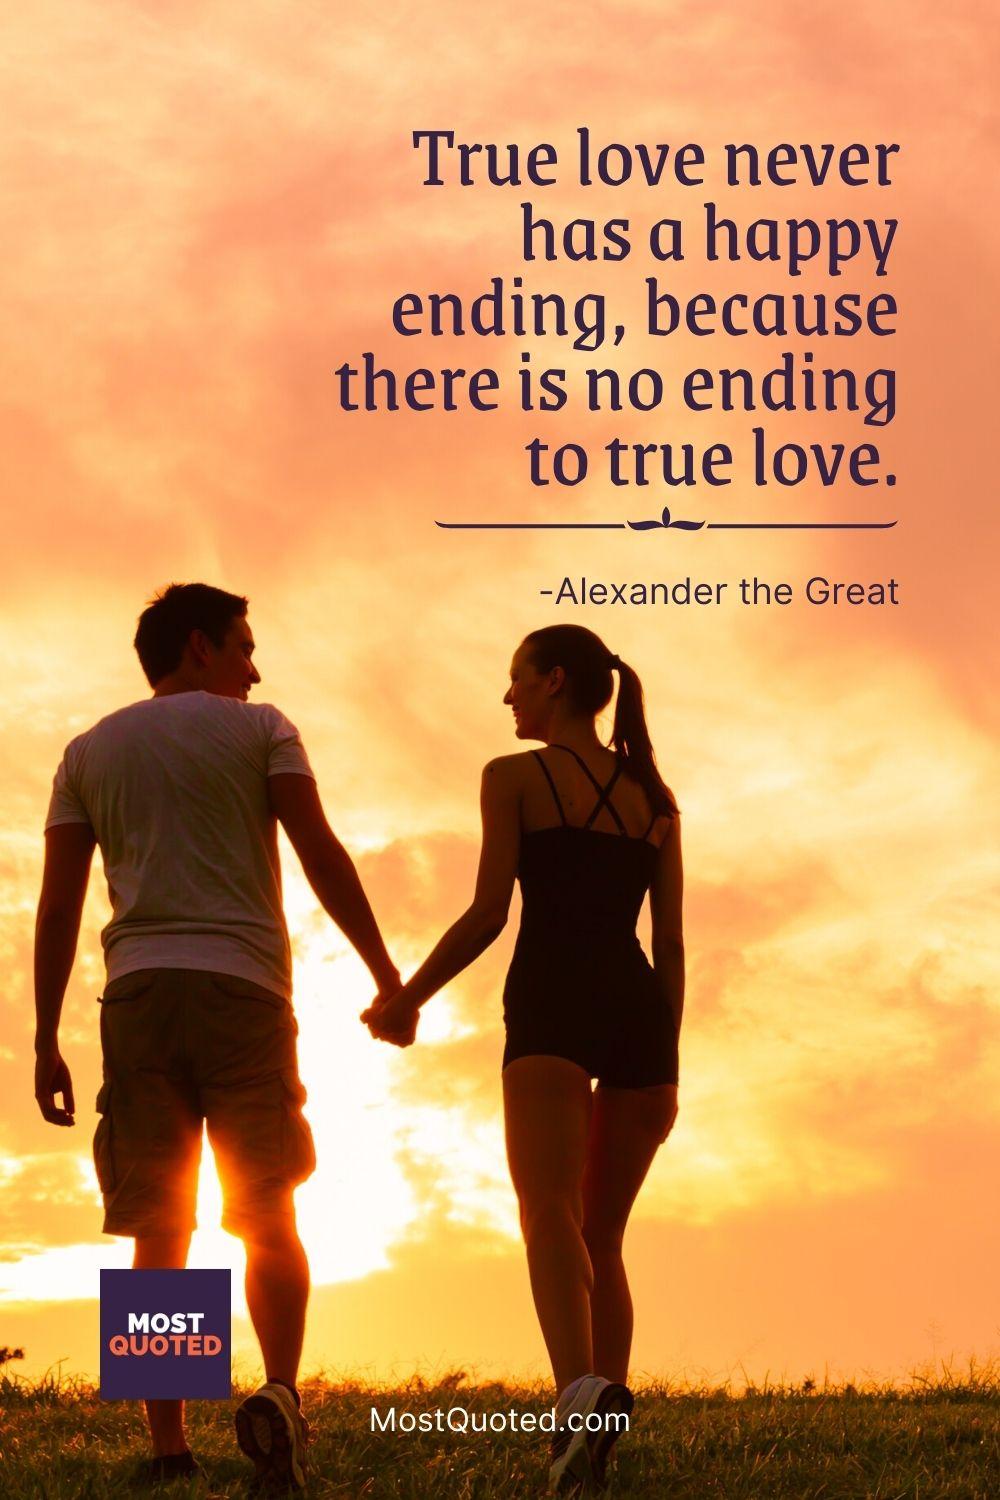 True love never has a happy ending, because there is no ending to true love. - Alexander the Great